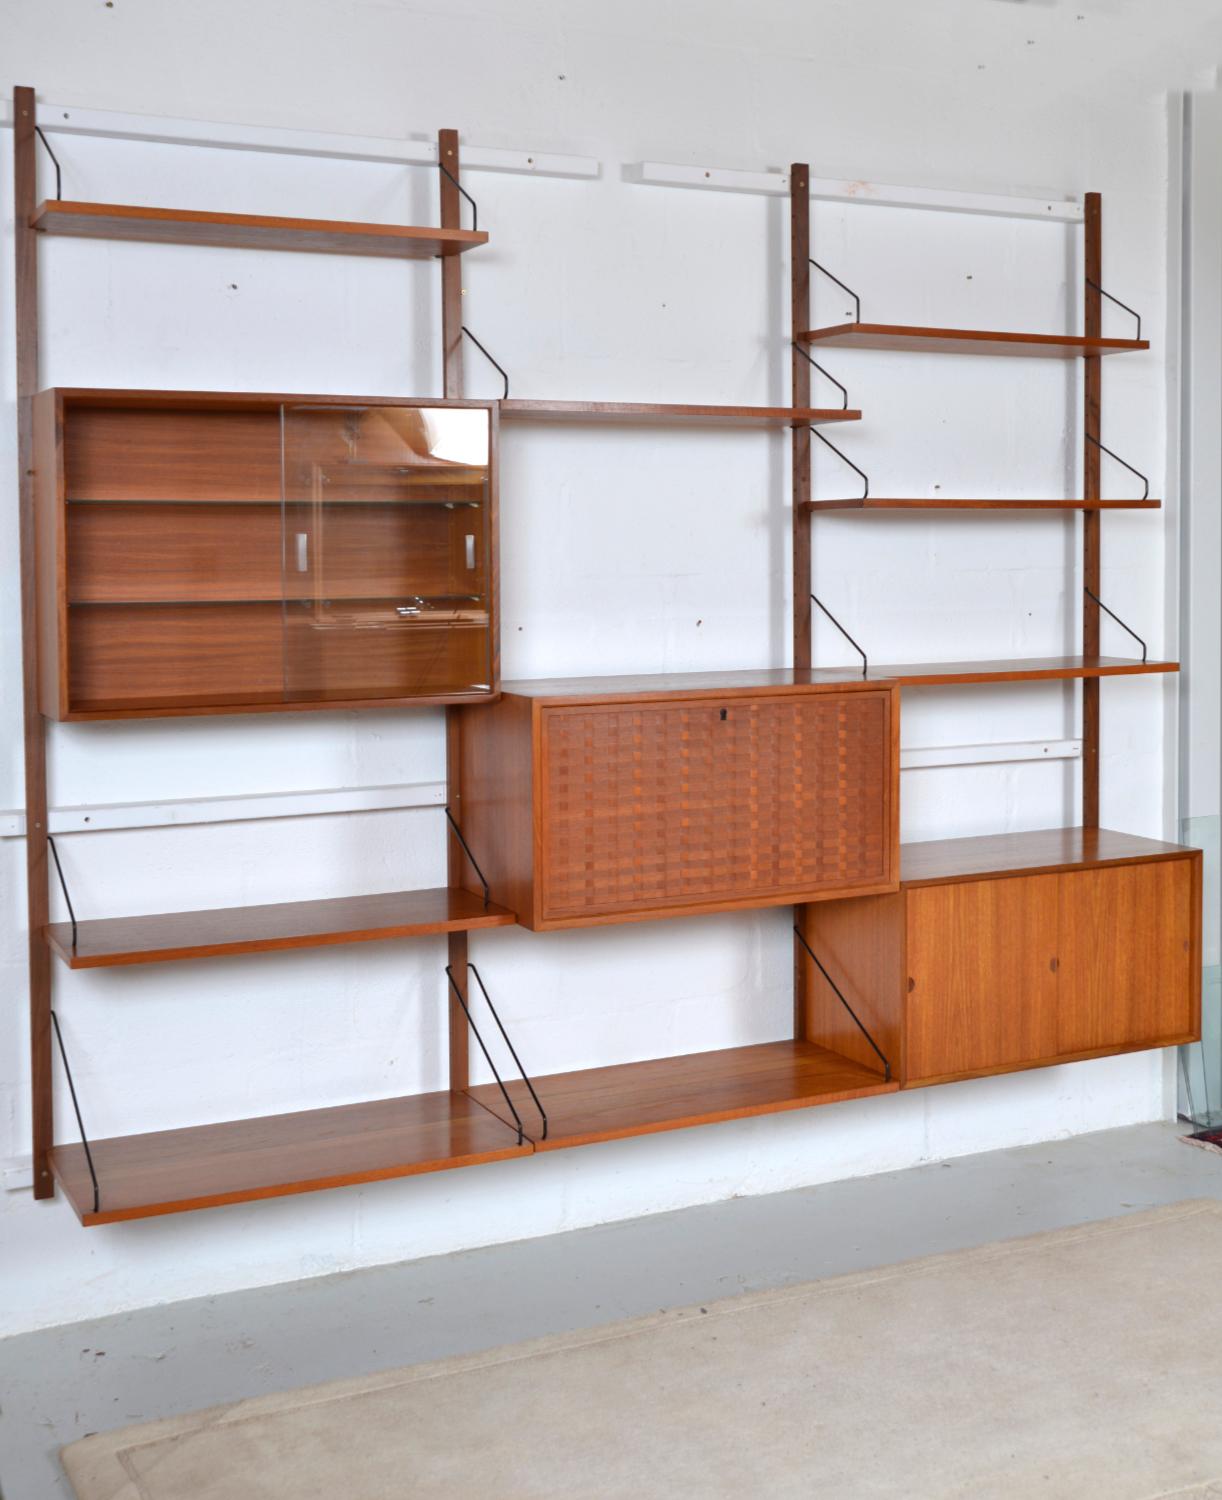 This highly versatile and functional “Royal System” was originally designed by Poul Cadovius in 1948. This useful three-bay teak shelving system offers a wide variety of storage and display options, as shown in the different set up. The set includes